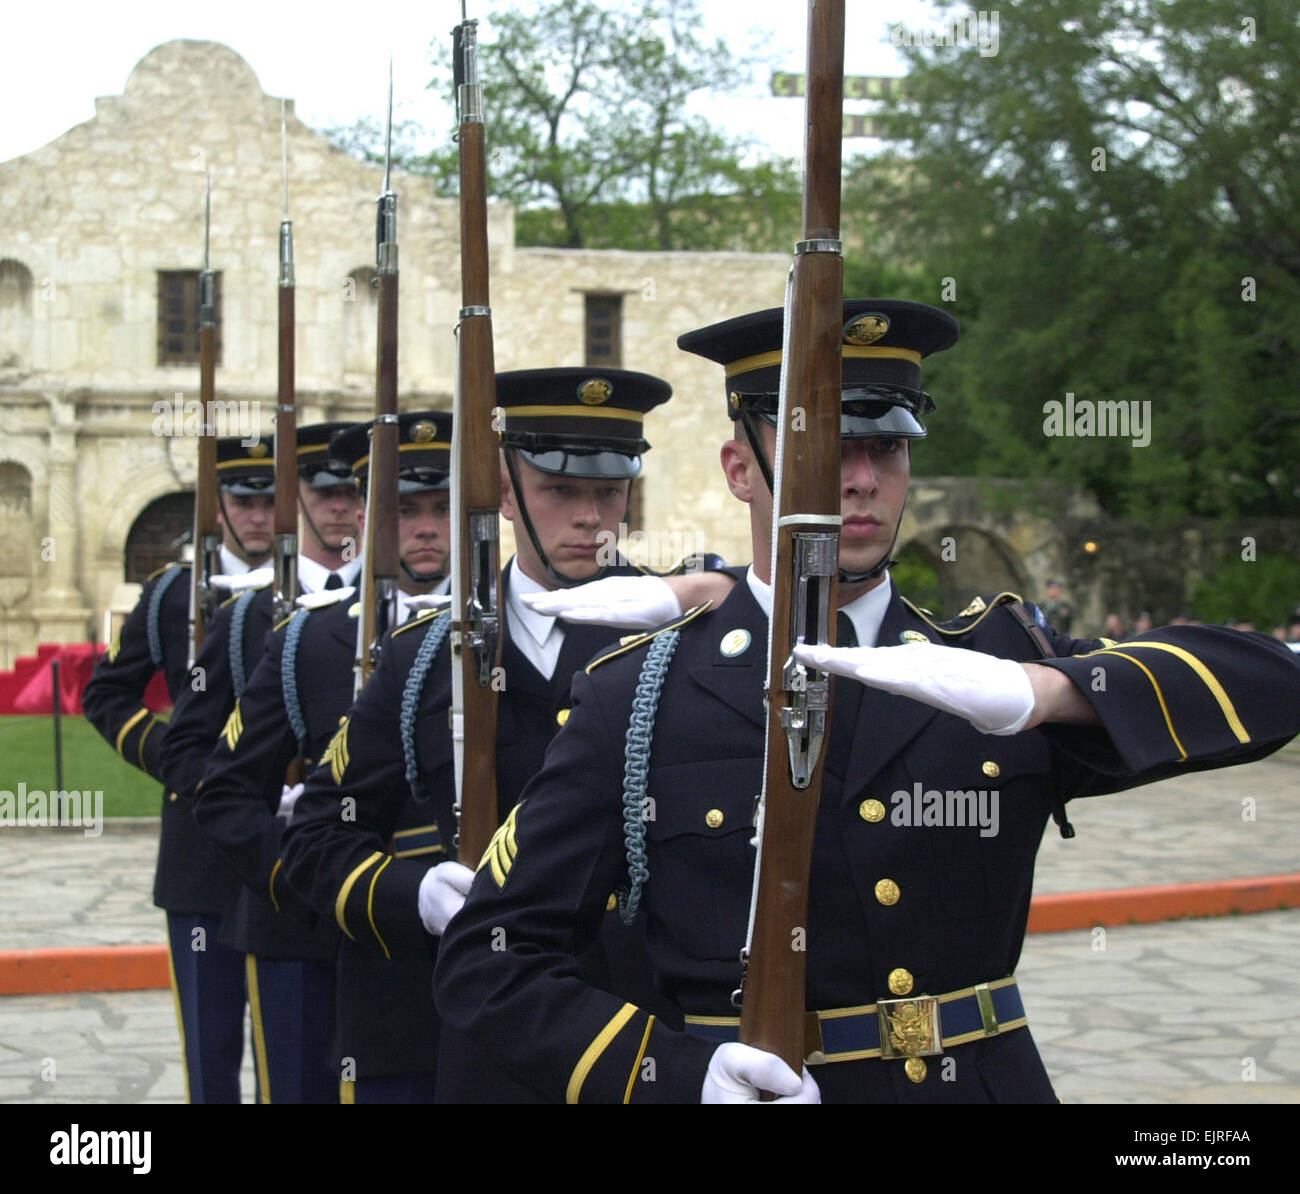 The Old Guard does some precision drill movements at the Alamo in San Antonio on Fiesta Day. Stock Photo